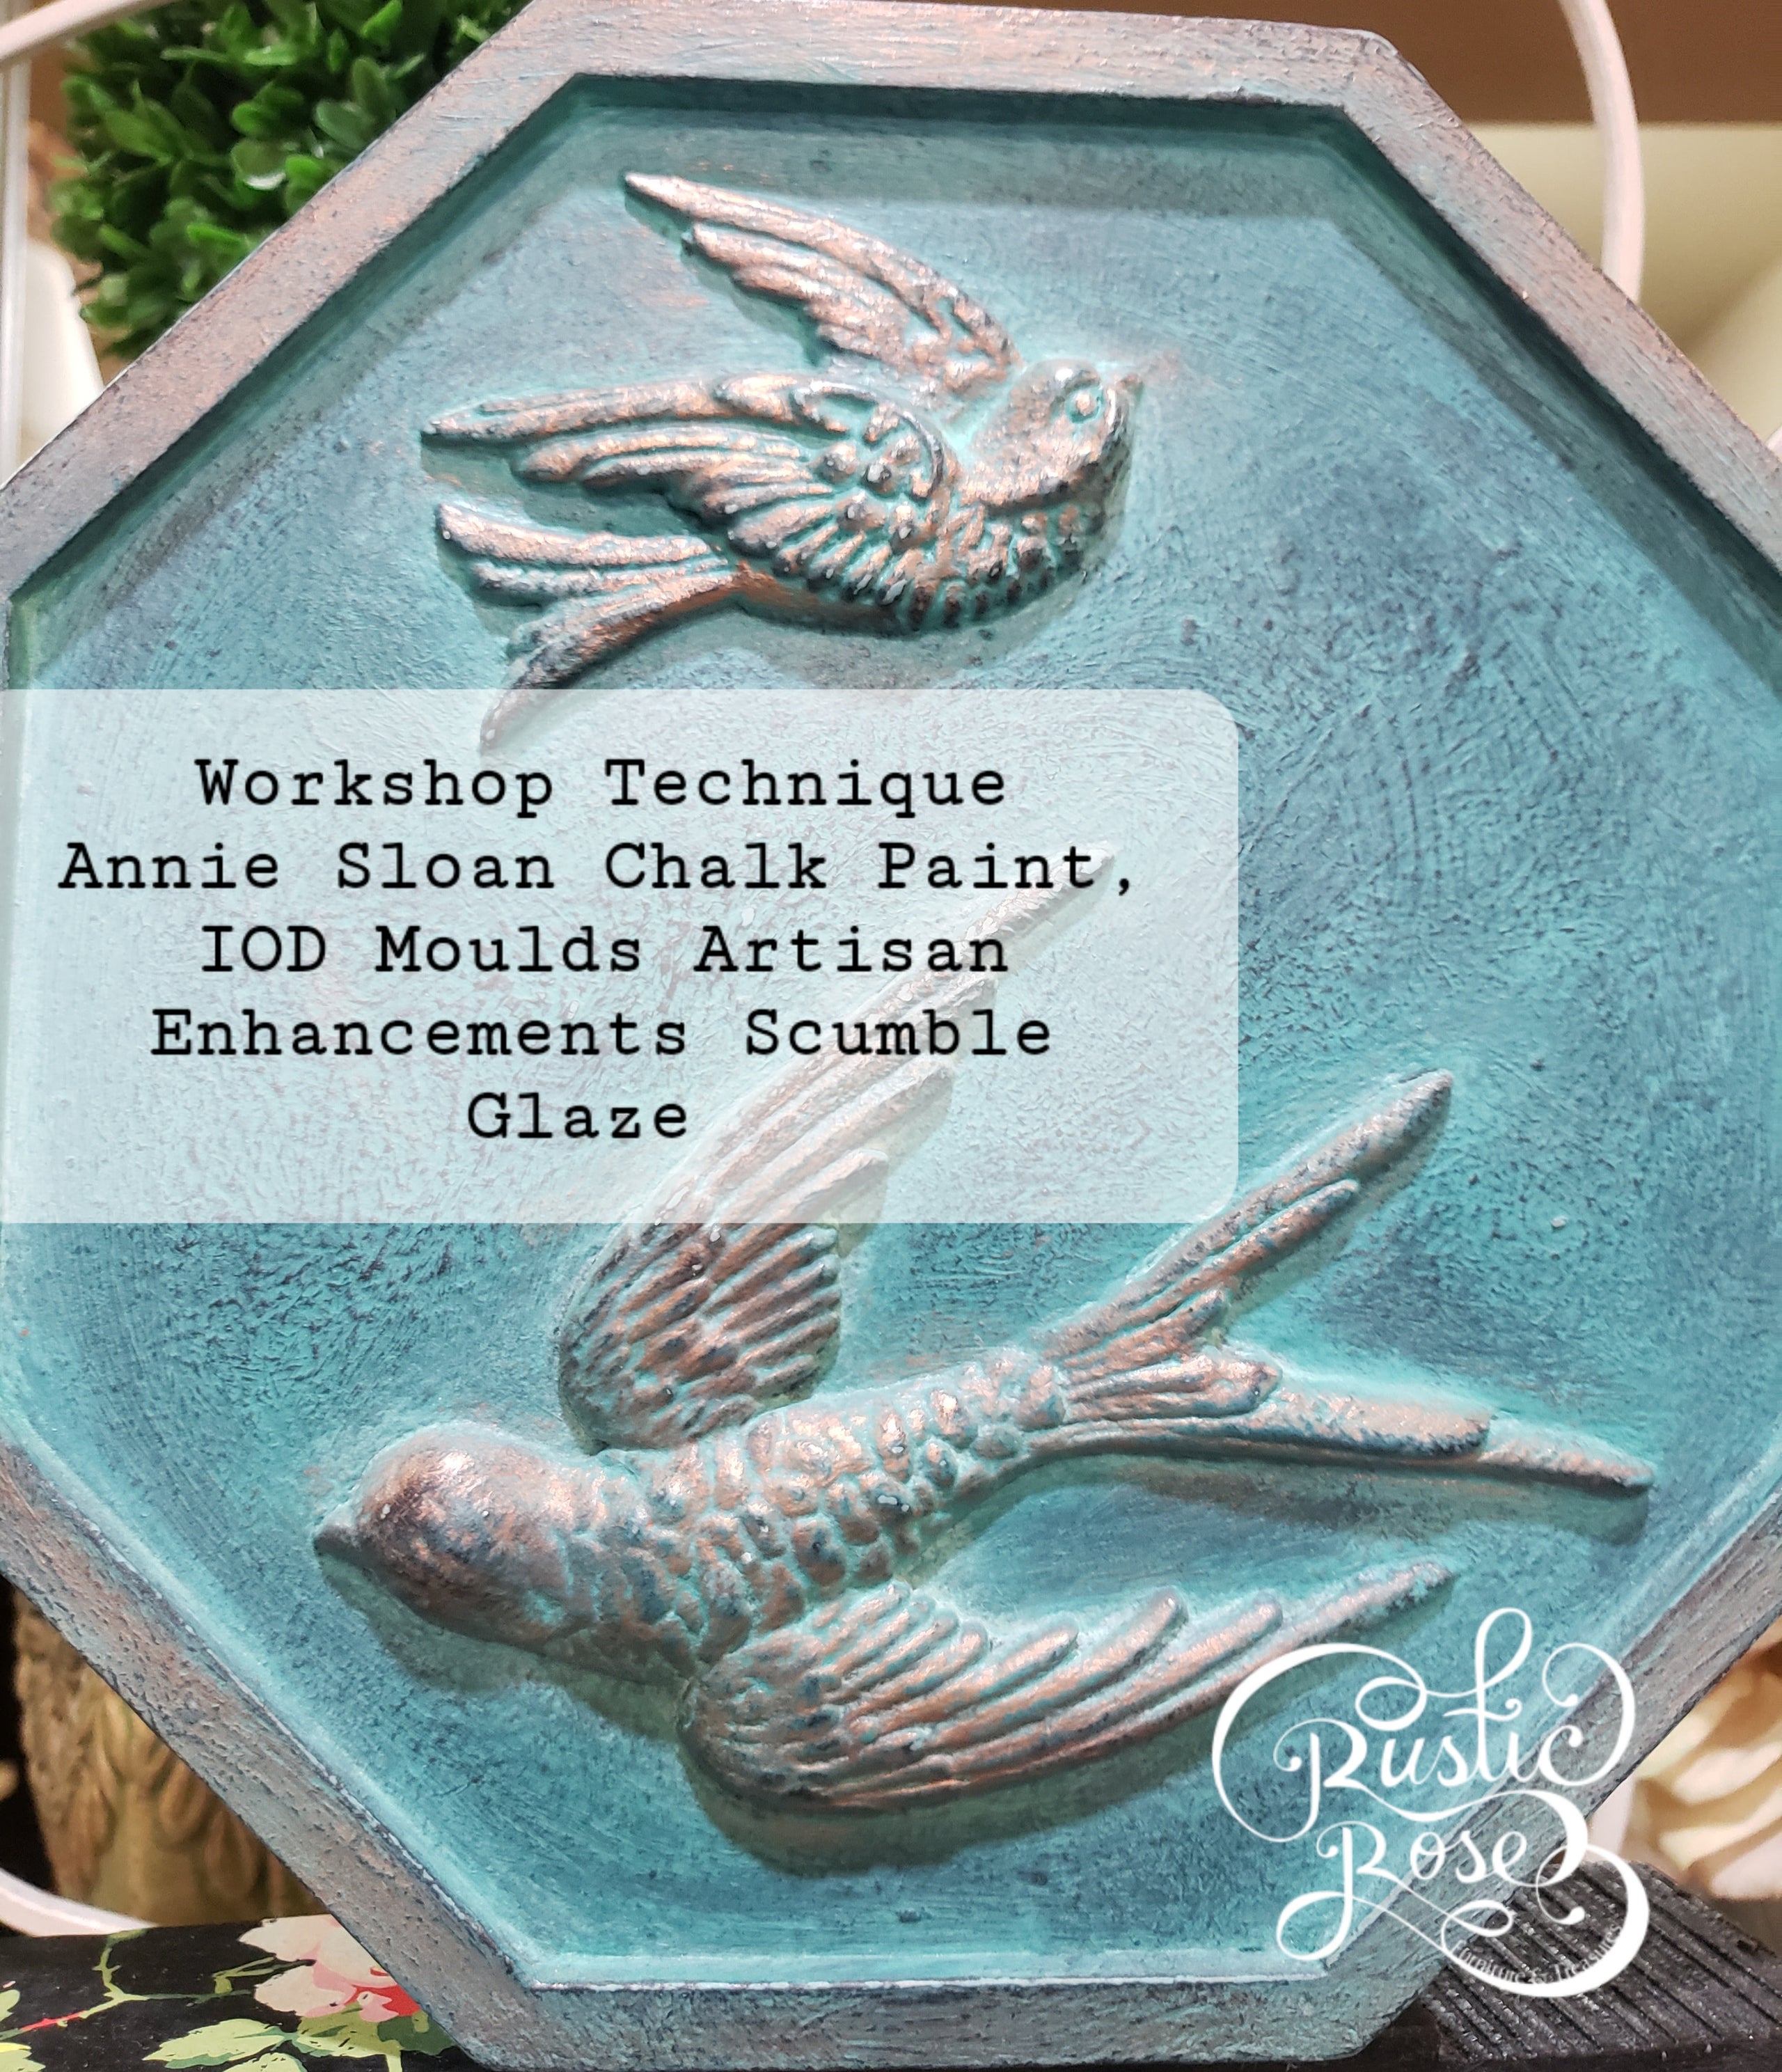 IOD Moulds Workshop Technique  NEW LOCATION!! Open May 31st 2023 Rustic  Rose 817-800-7298 218 N. Mason Street ~ Bowie, Texas 76230 Hours  Wednesday-Friday 11am-5pm & Saturday 11am-2pm